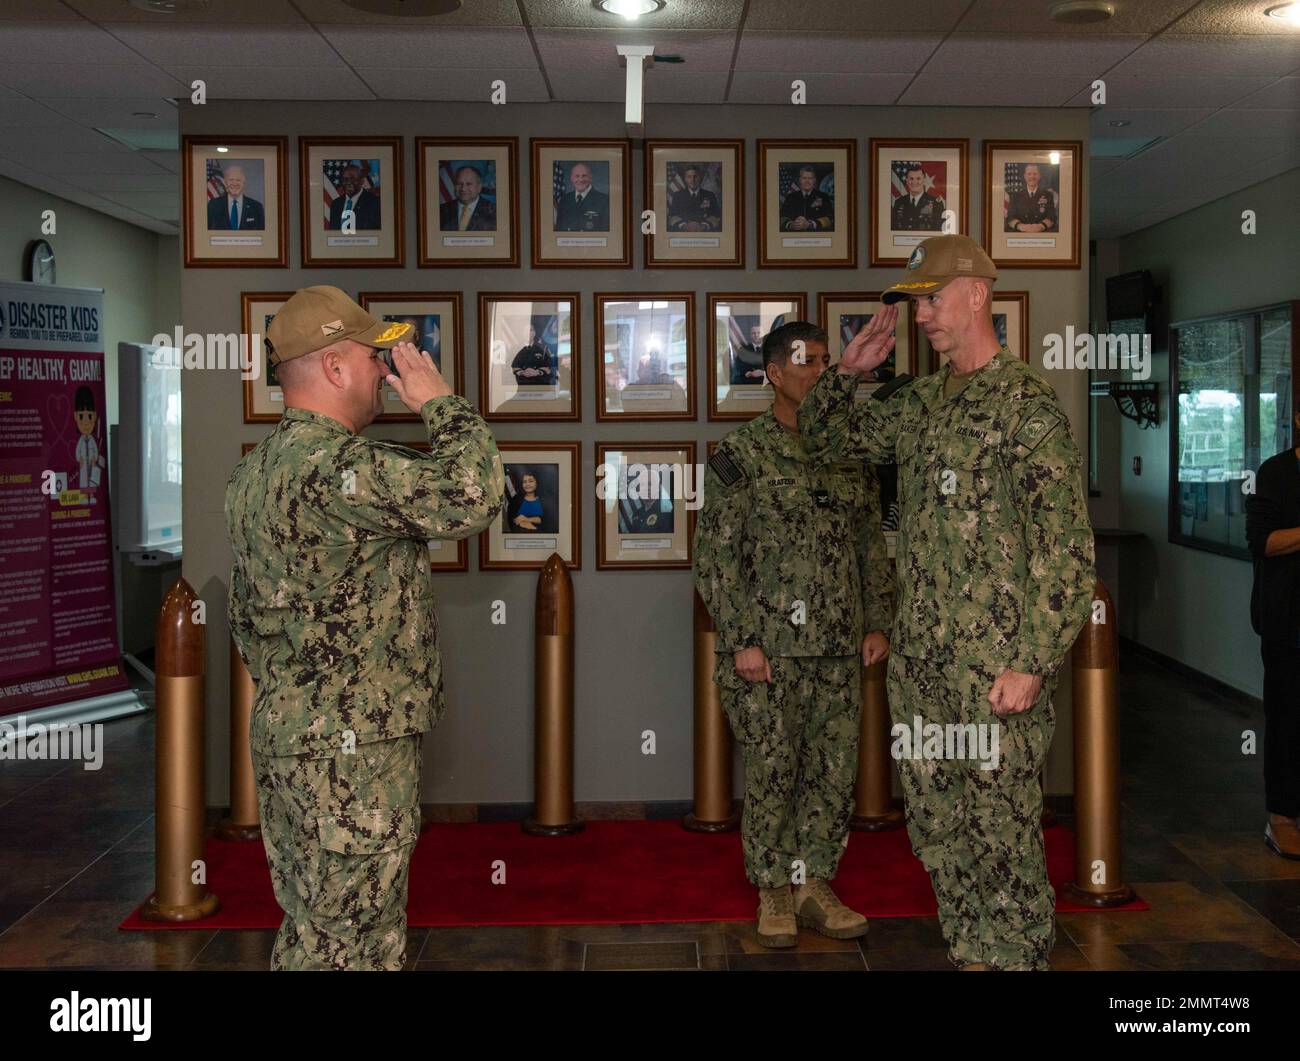 ASAN, Guam (Sept. 22, 2022) - Capt. Michael R. Baker, a Navy Chaplain, receives an ovation for his dedicated service from military and civilian personnel from Joint Region Marianas, Sept. 22. Chaplain Baker is continuing his service at U.S. Fleet Cyber Command, Ft. Meade, MD. Stock Photo